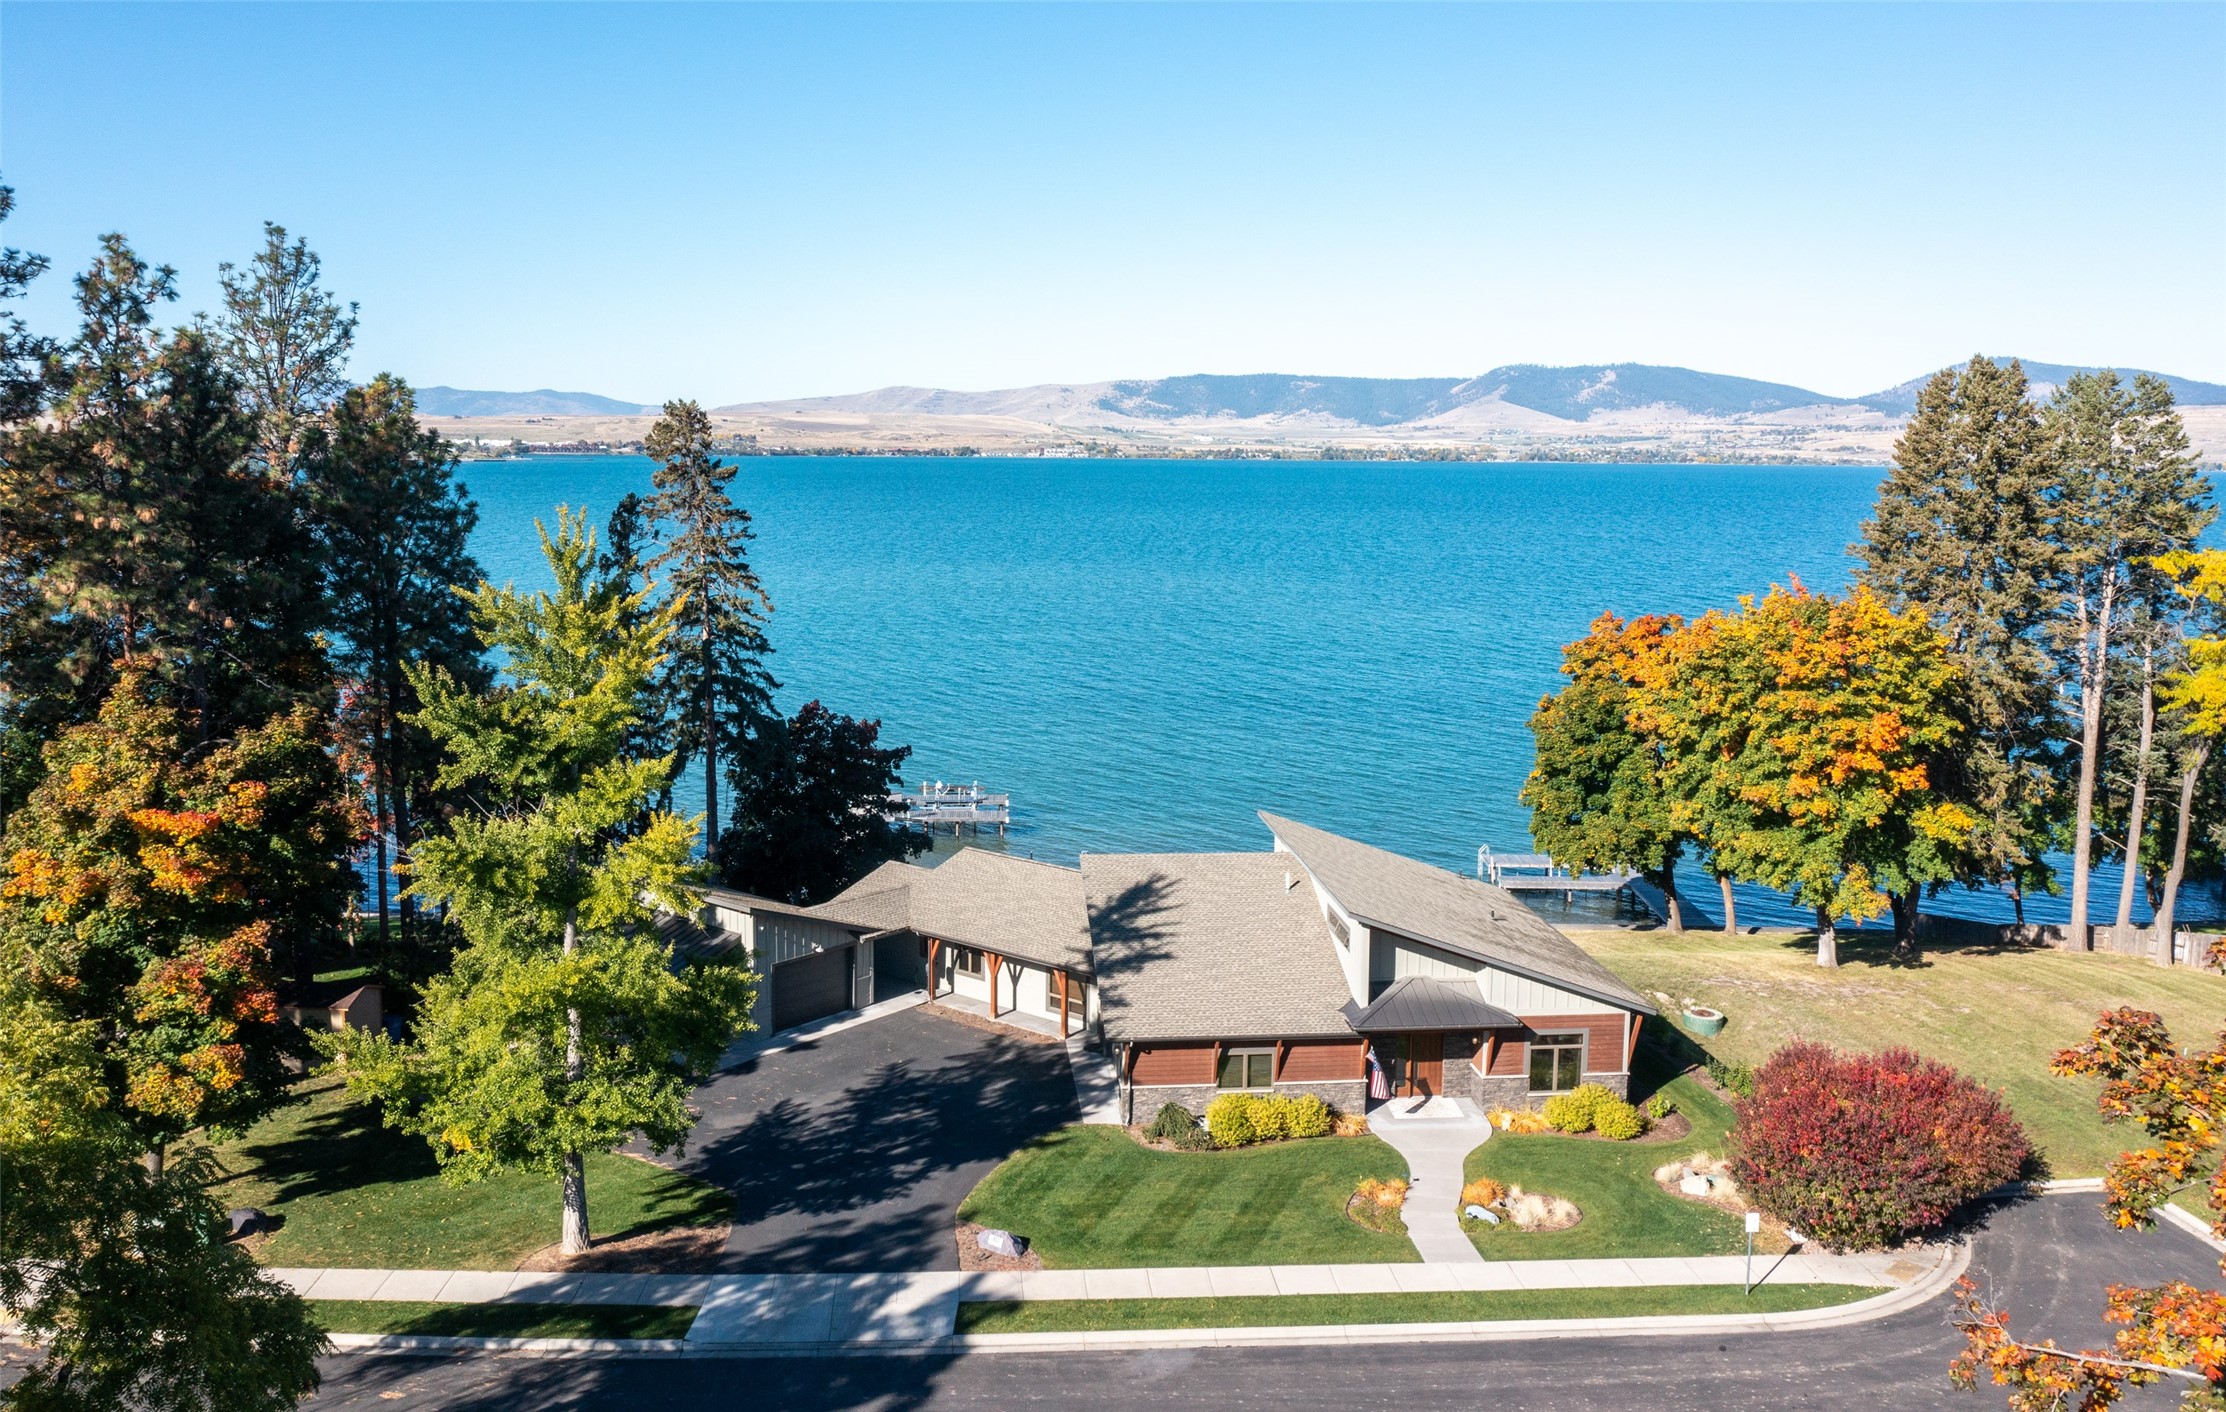 Welcome to 103 Anderson Place, on the shores of Flathead Lake! This thoughtfully designed residence, built by the esteemed Gallatin Construction in 2016, offers a lifestyle of comfort, convenience, and natural beauty.  Located just a chip shot from the 3rd Tee box of the 27-hole Polson Bay golf course, this inviting home calls you to live life to the fullest.  The 3 bedrooms, 2 1/2 bathrooms, 2708 sq. ft,  predominantly one-level floor plan with zero-entry, is perfect for all generations.  Every evening, embrace the breathtaking beauty of Montana's sunsets as they paint the sky over Flathead Lake. Huge windows frame these colorful vistas, creating a living canvas in your very own home. The patio is your private sanctuary, featuring a propane fireplace overlooking your 126’ of frontage, complete with a 120' long dock with a boat slip. Whether you're gathering with friends or simply enjoying a quiet evening, this space is perfect for entertaining and relaxation.  Soak in the soothing waters of your own Hot Spring Spa with a stunning view, the ideal way to unwind and rejuvenate amidst the serene surroundings.  Your primary suite is complete with patio access, heated bathroom floors, a separate shower, a deep soaking tub, and a walk-in closet. Start your day with a round of golf amidst picturesque Mission Mountain and lake views. In the afternoon, surf or sail on the crystal-clear waters of Flathead Lake.  103 Anderson Place is more than a home; it's a gateway to the best of Montana living. Whether you're seeking serene relaxation or outdoor adventures, this lakeside gem has it all.  Your Montana dream begins here. Please see feature sheet for more details.  Agent owned.  Call Amy Peterson at 406-370-7071 or your real estate professional.